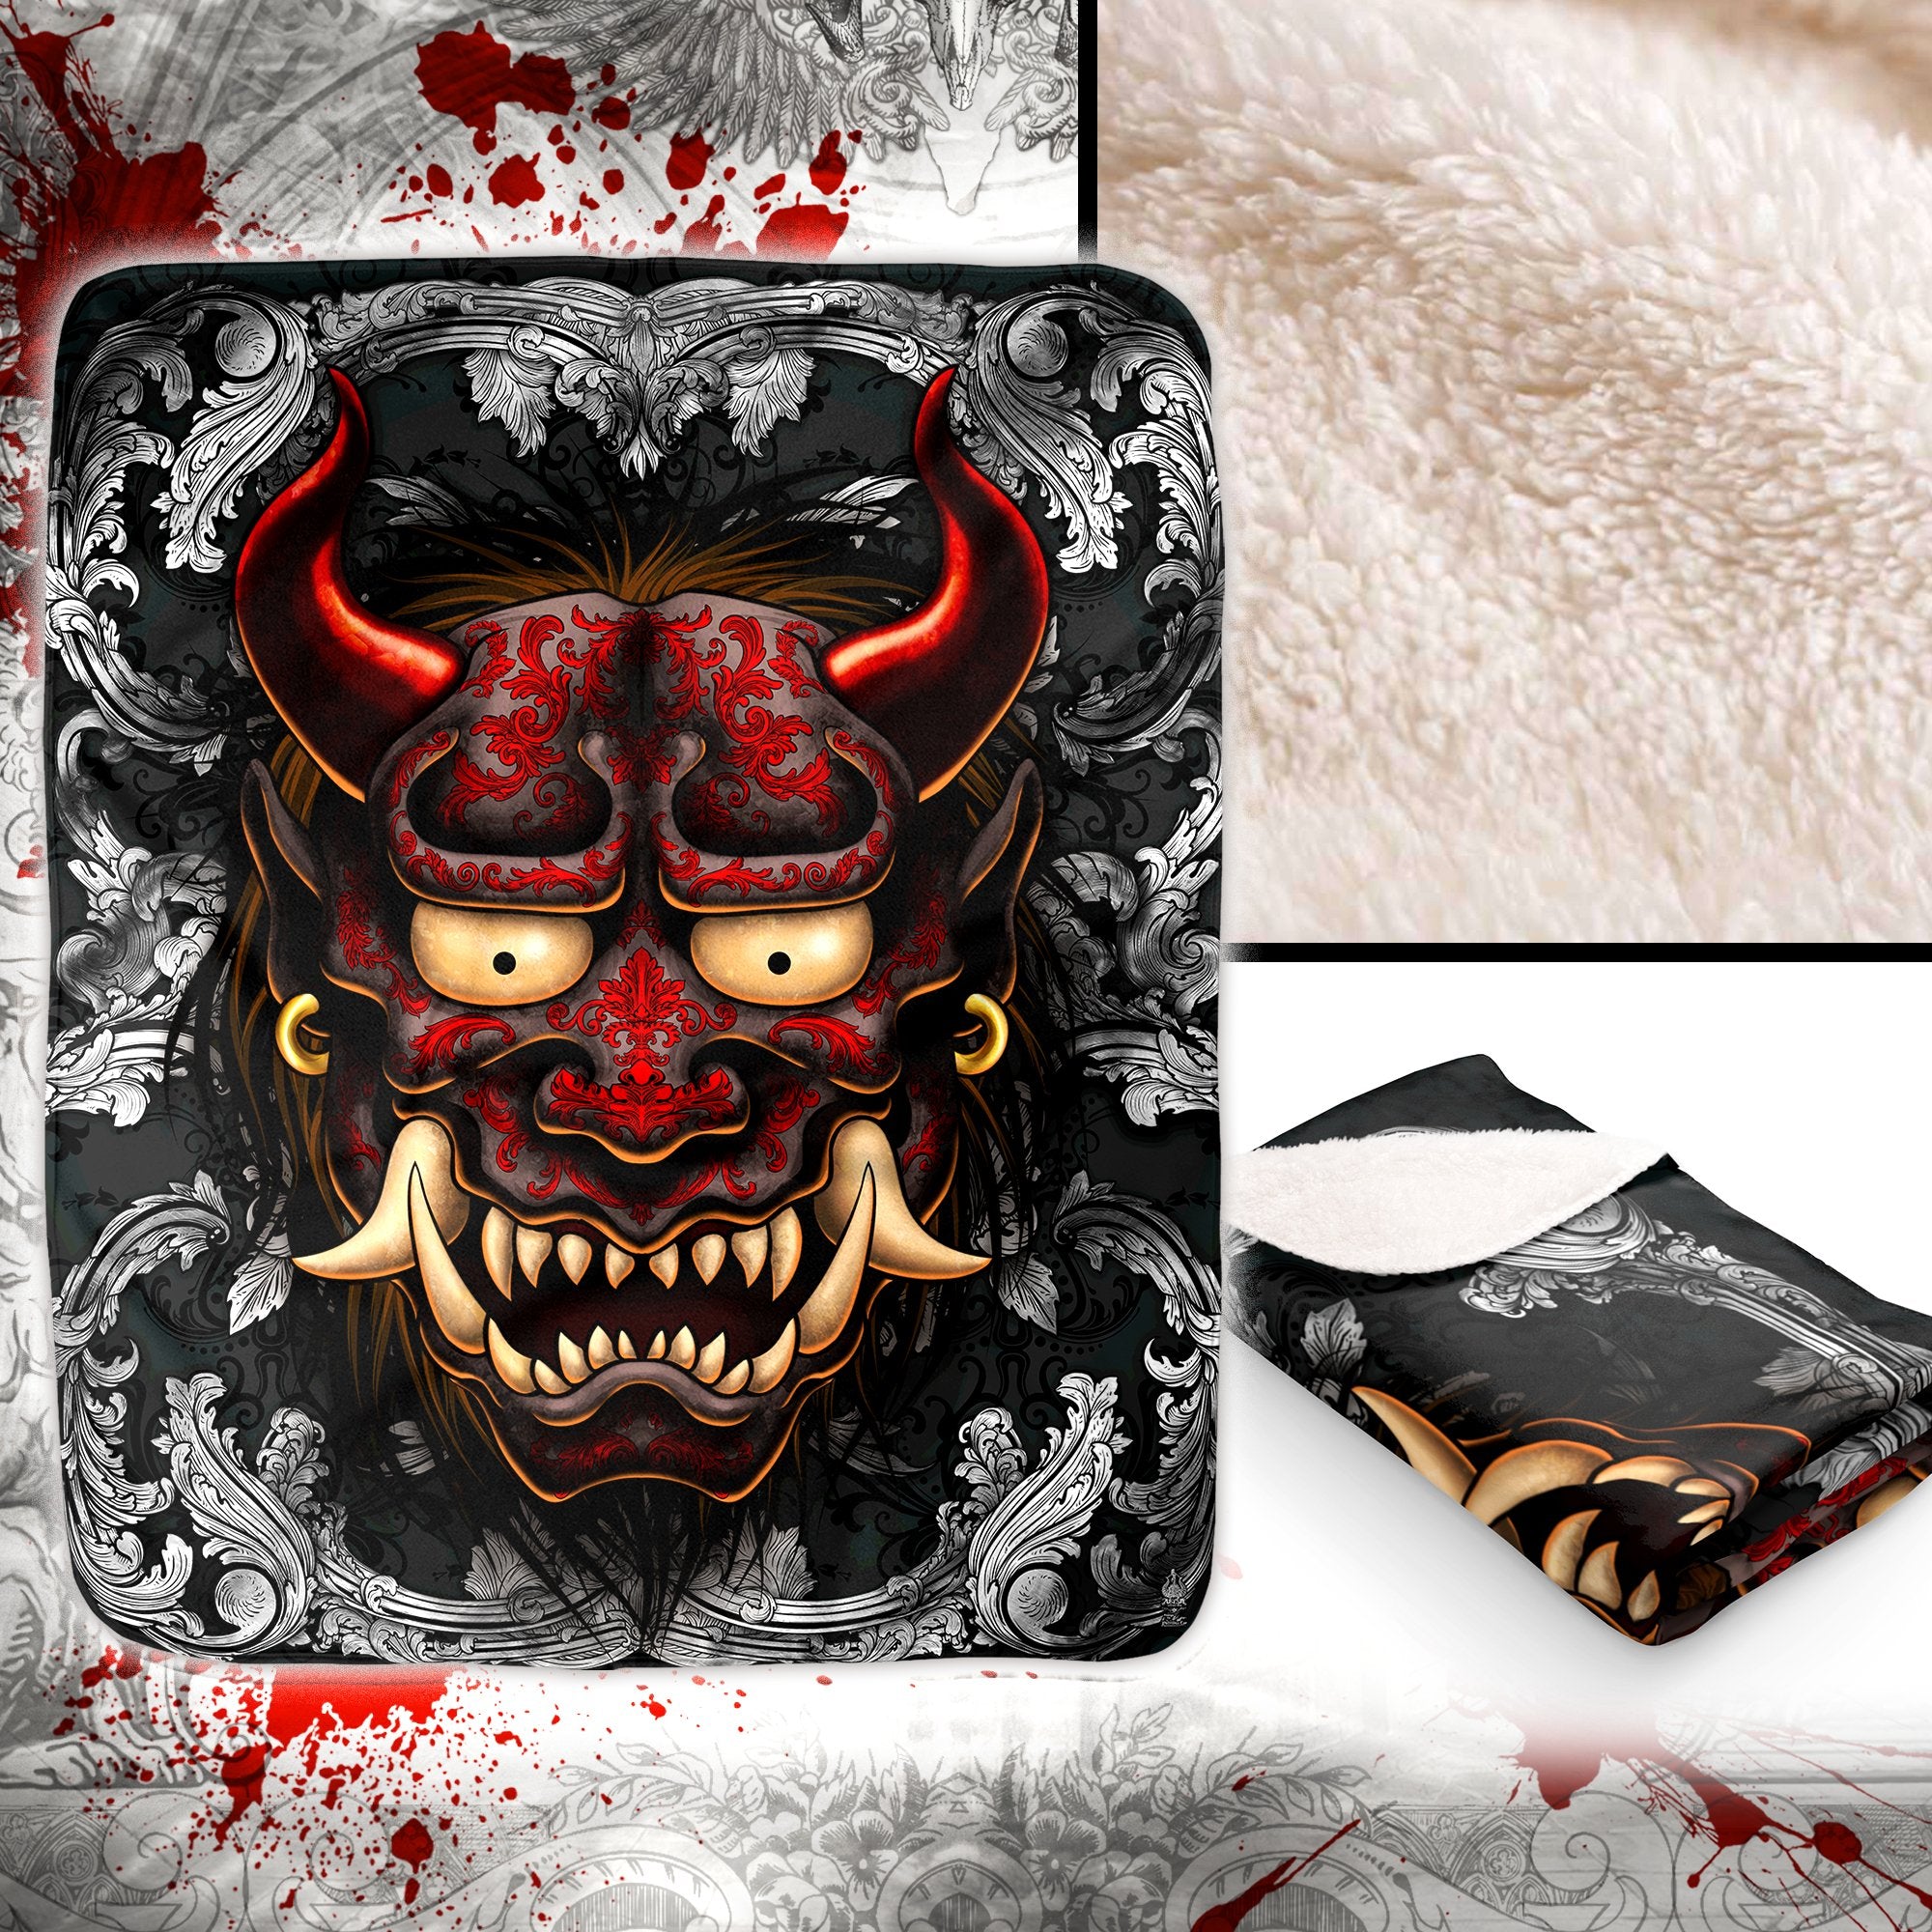 Silver Oni Sherpa Fleece Throw Blanket, Japanese Demon, Alternative and Goth Home Decor - Red and Black, 2 Colors - Abysm Internal